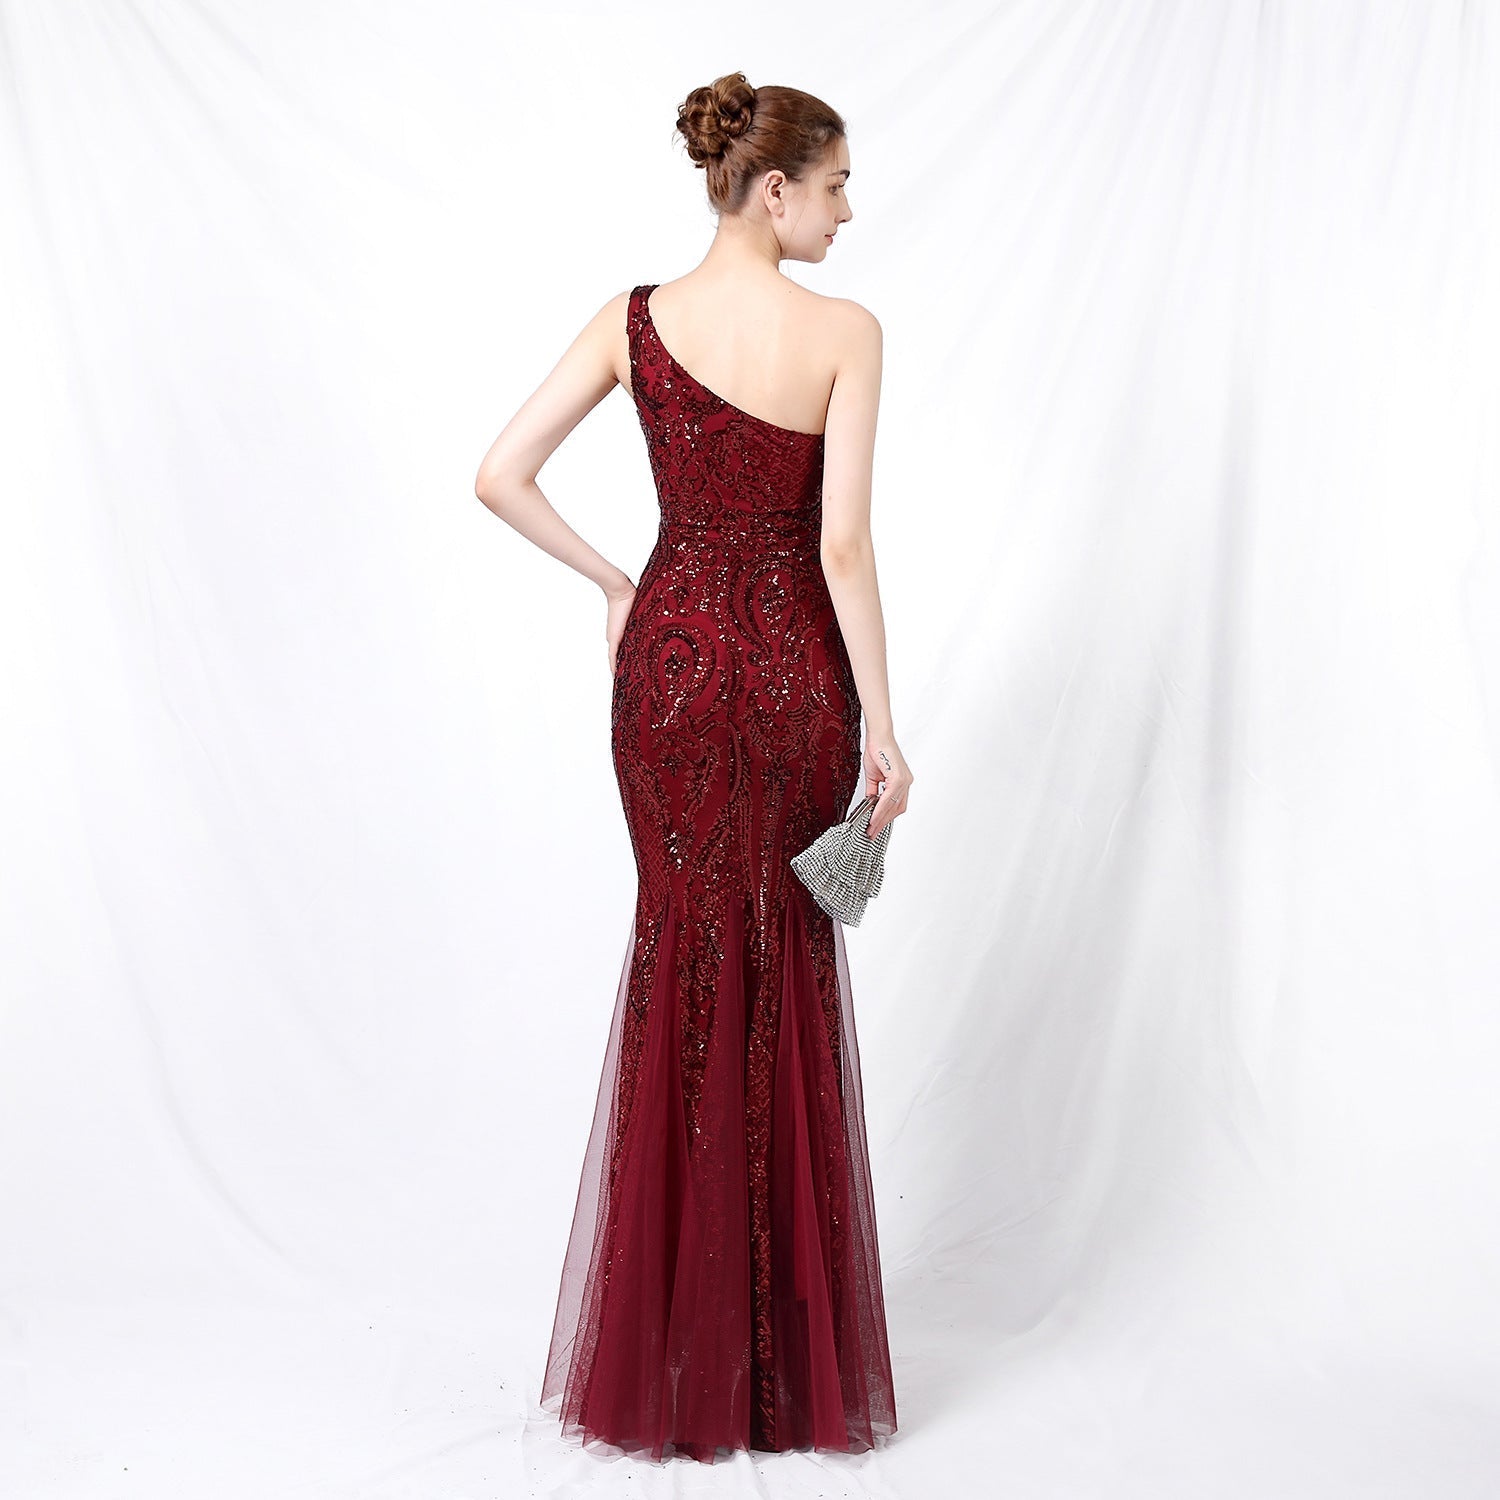 Emily formal one-shoulder sequined mesh fishtail dress - Lady Occasions